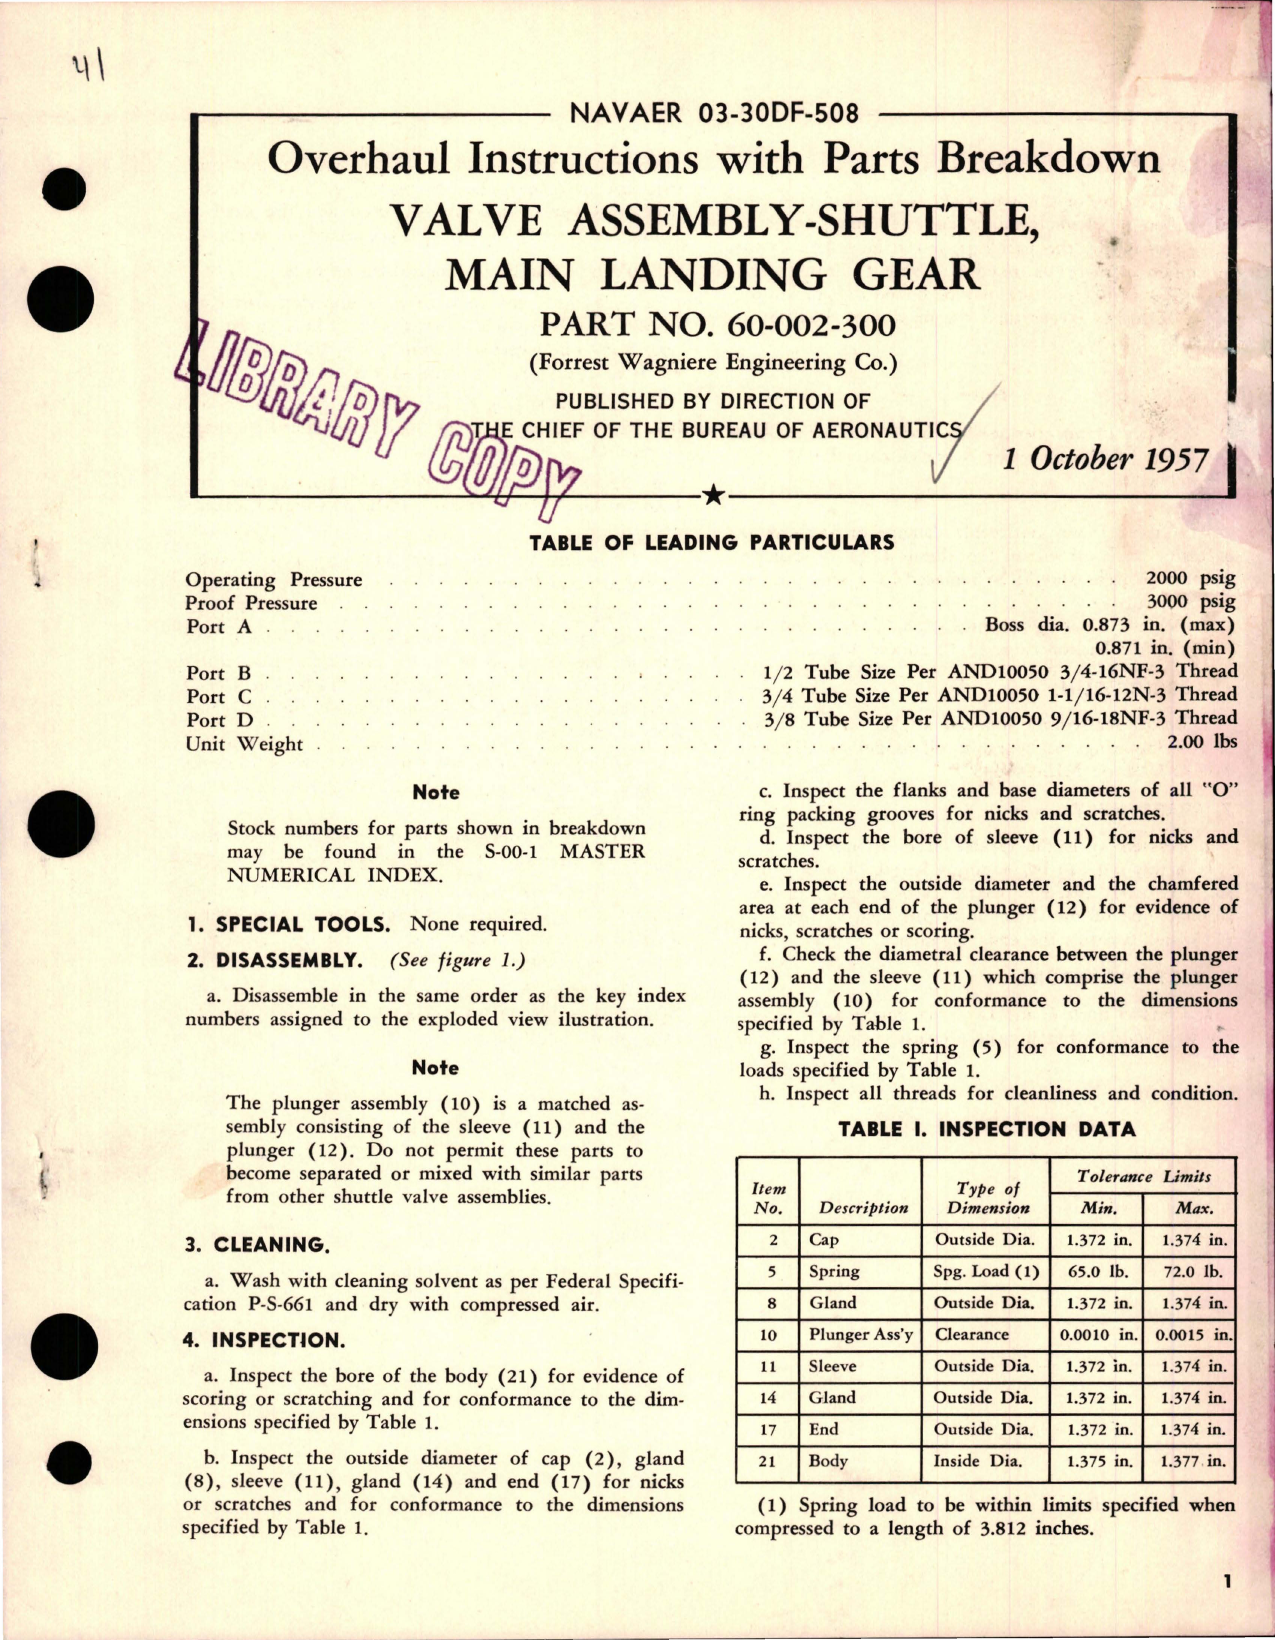 Sample page 1 from AirCorps Library document: Overhaul Instructions with Parts Breakdown for Main Landing Gear Shuttle Valve Assembly - Parts 60-002-300